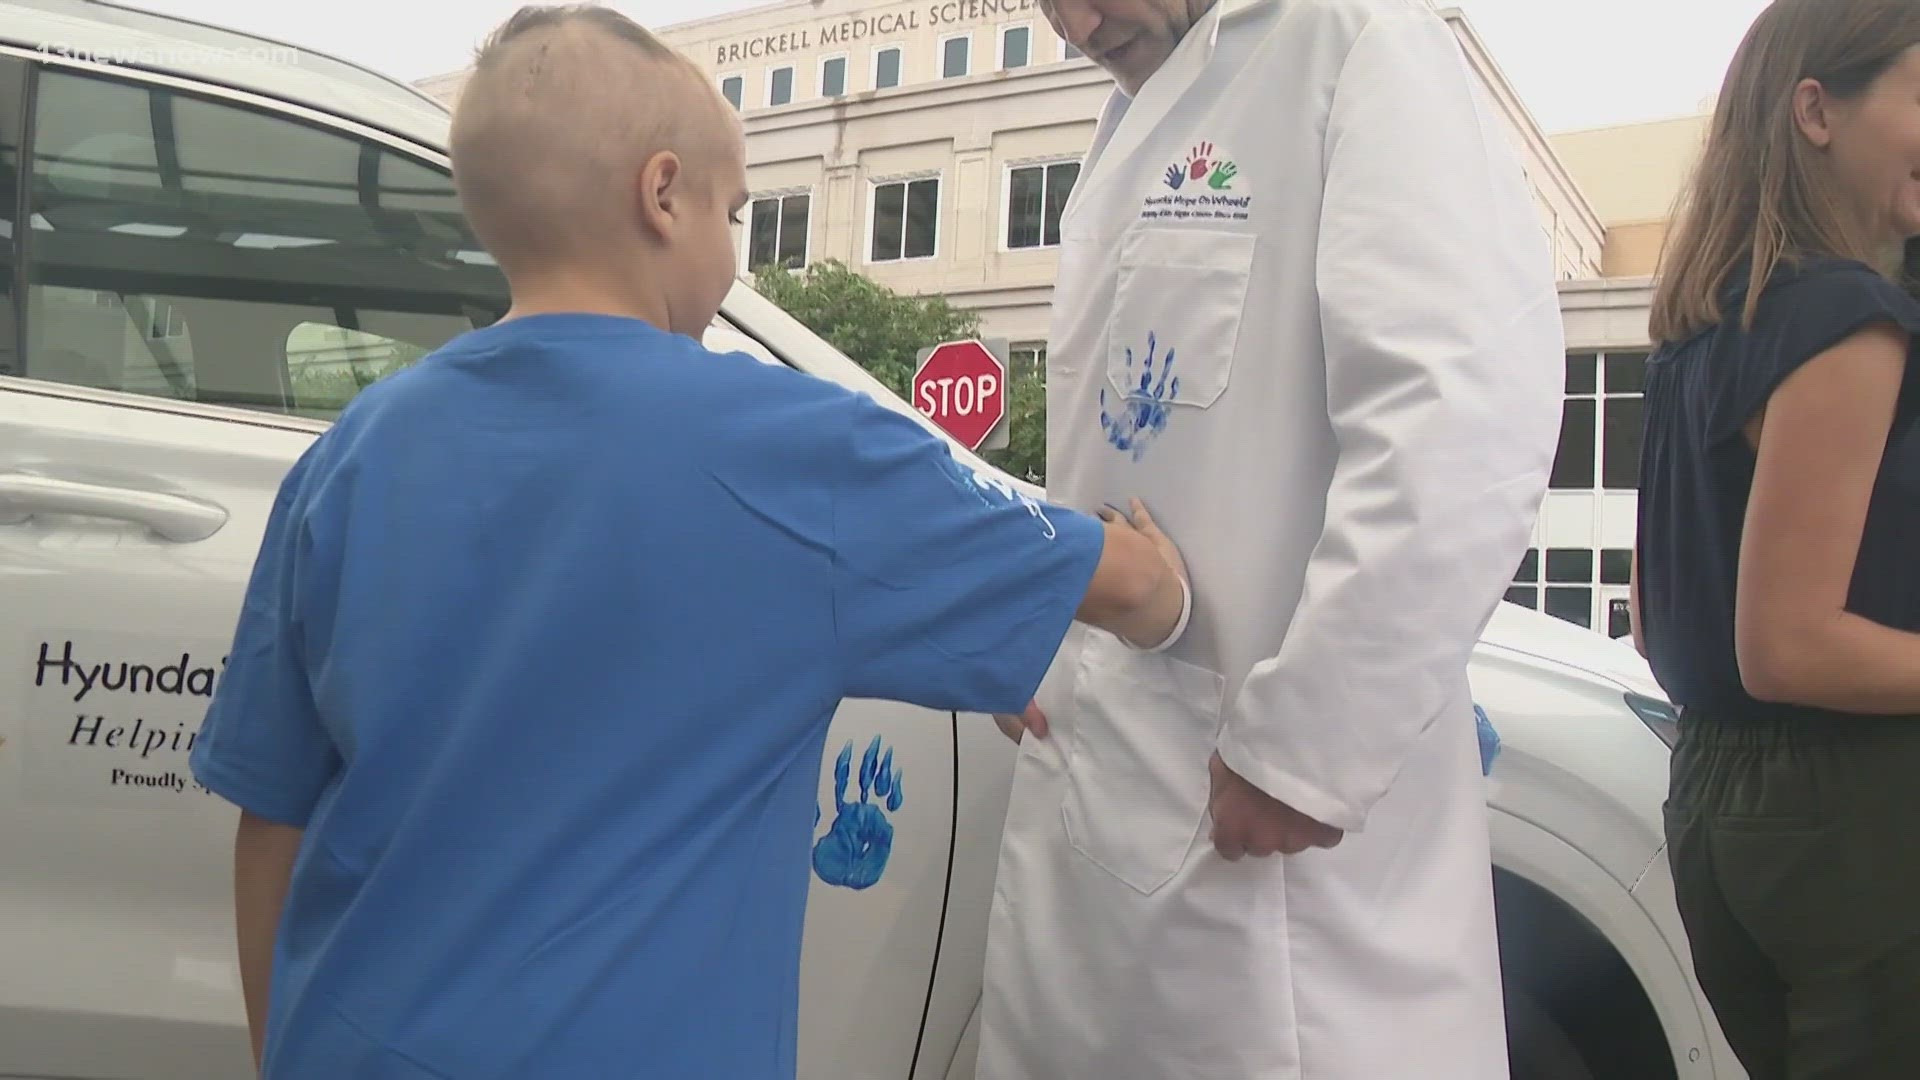 A $100,000 grant is heading to the hospital, thanks to Hyundai Hope on Wheels.